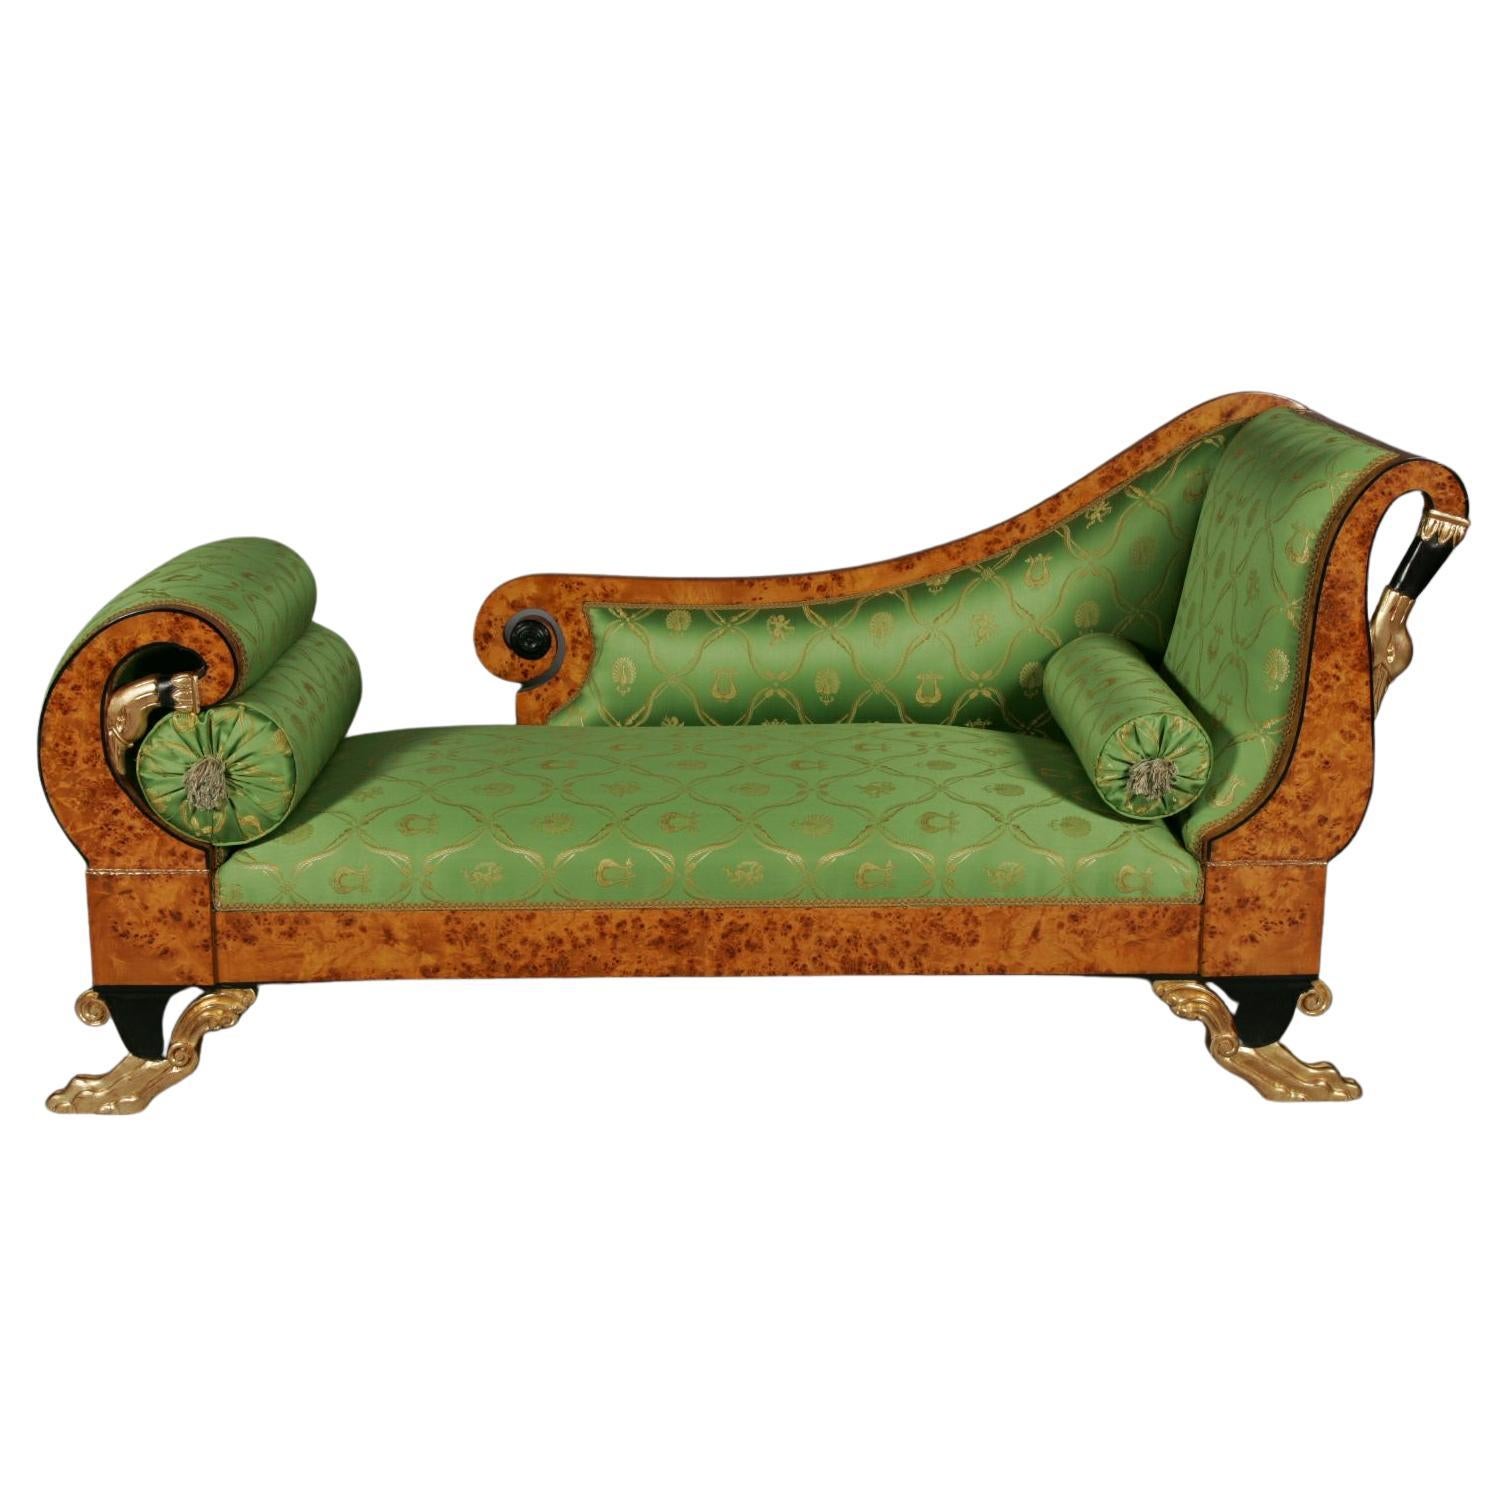 20th Century Empire Swan Chaise Longue/Sofa Lounge For Sale